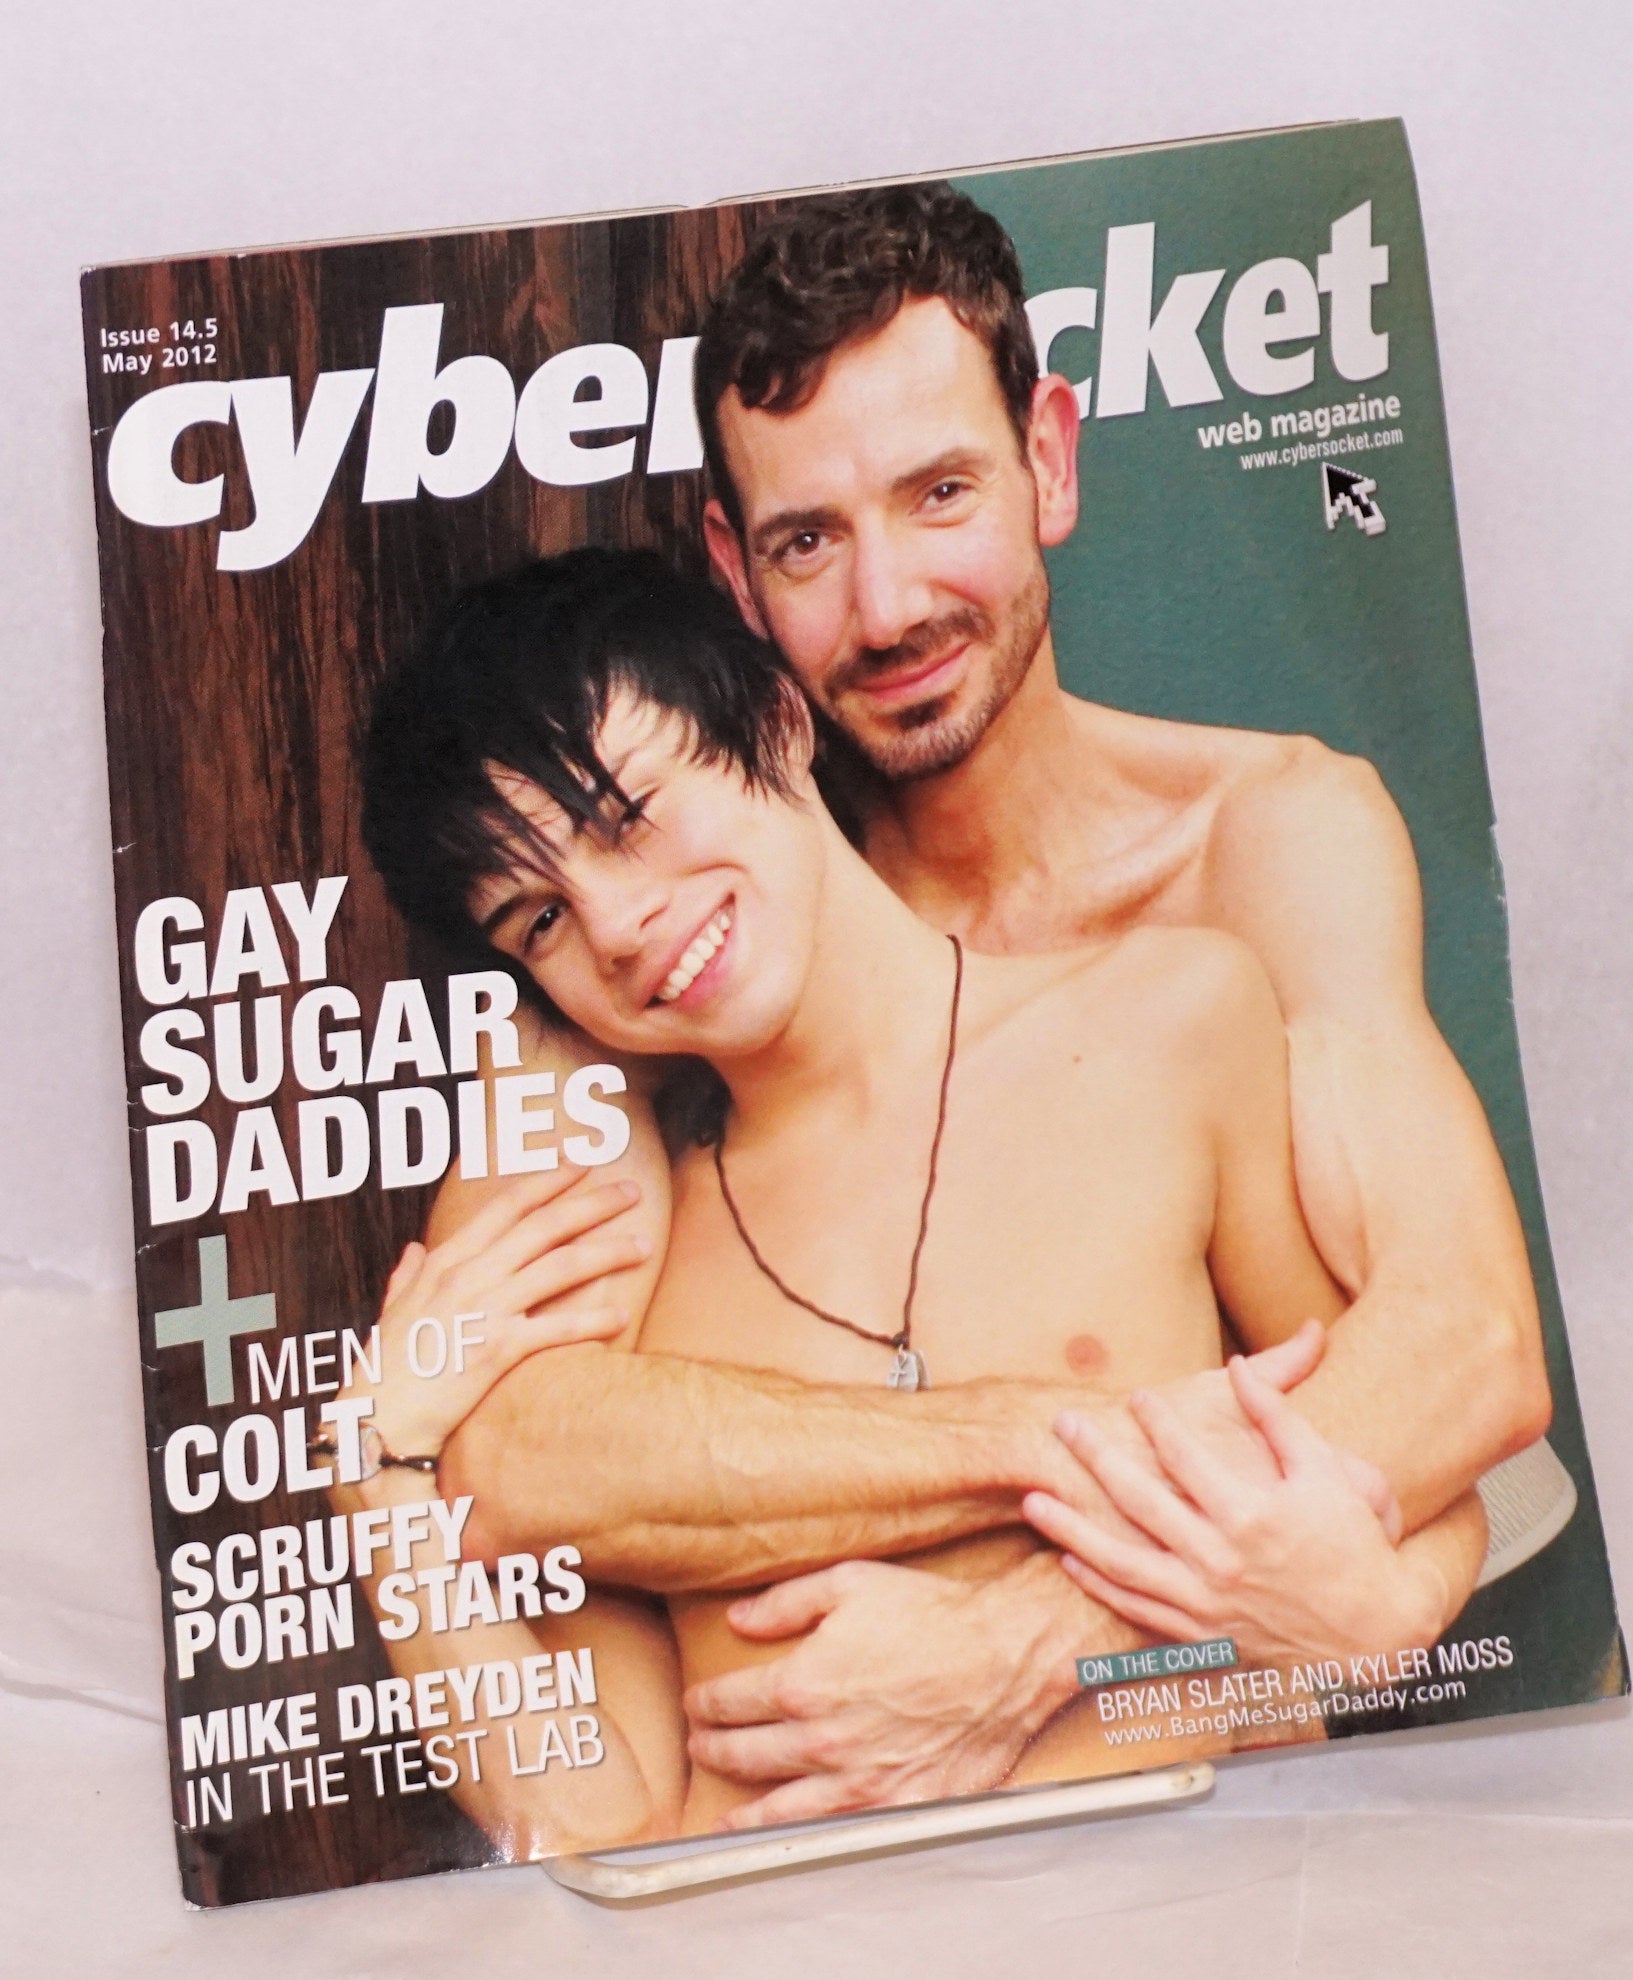 Cybersocket Web magazine the leader in gay and lesbian online information; issue 14.5, May 2012